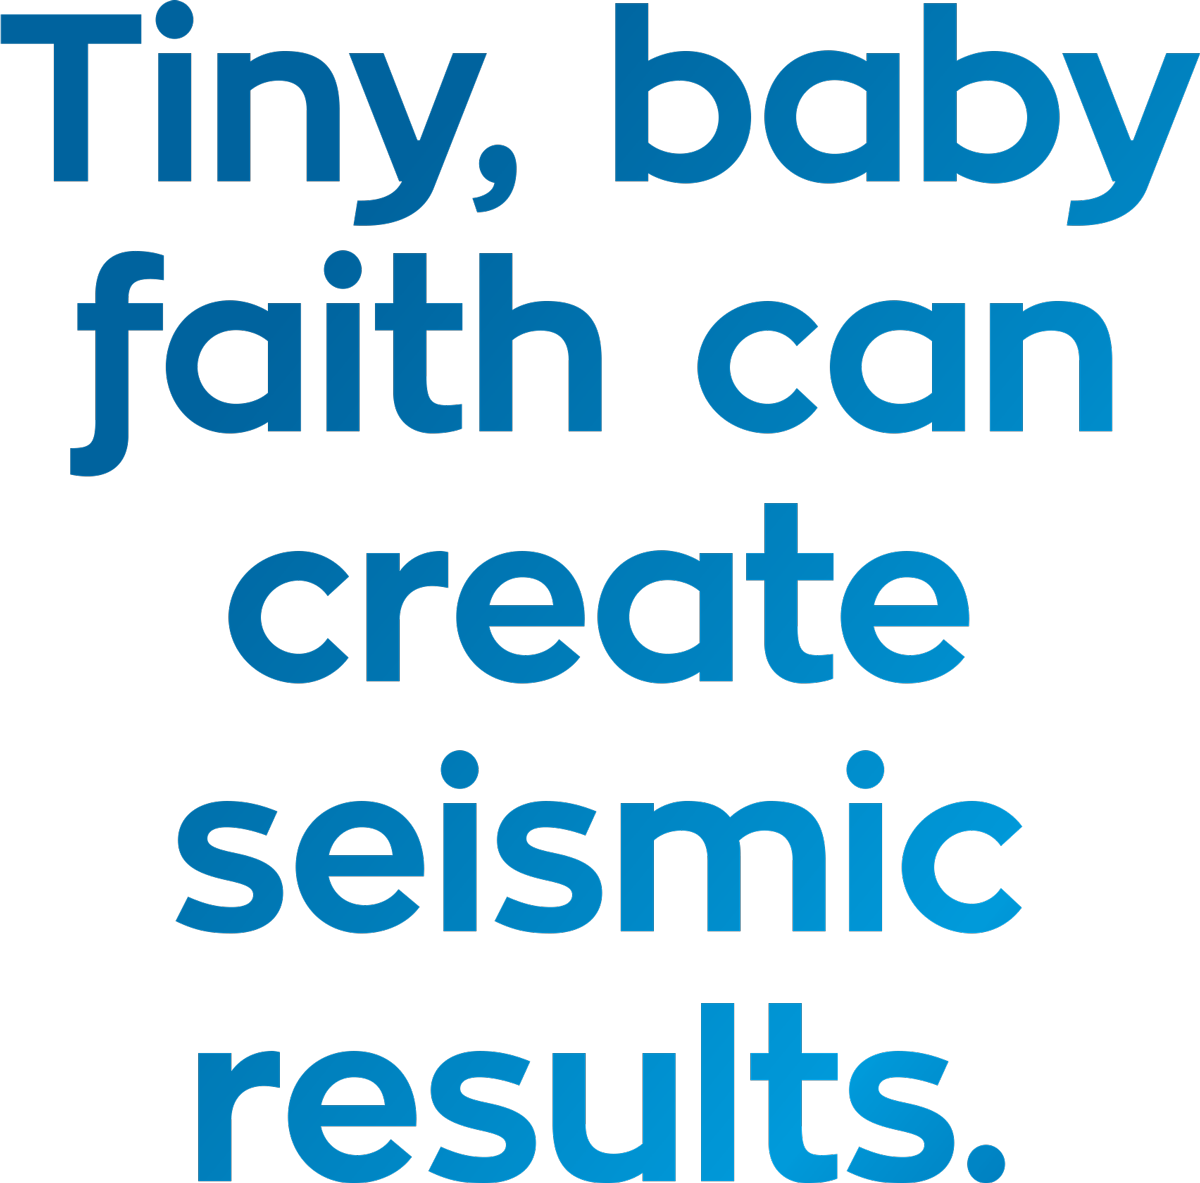 Tiny, baby faith can create seismic results. pull quote